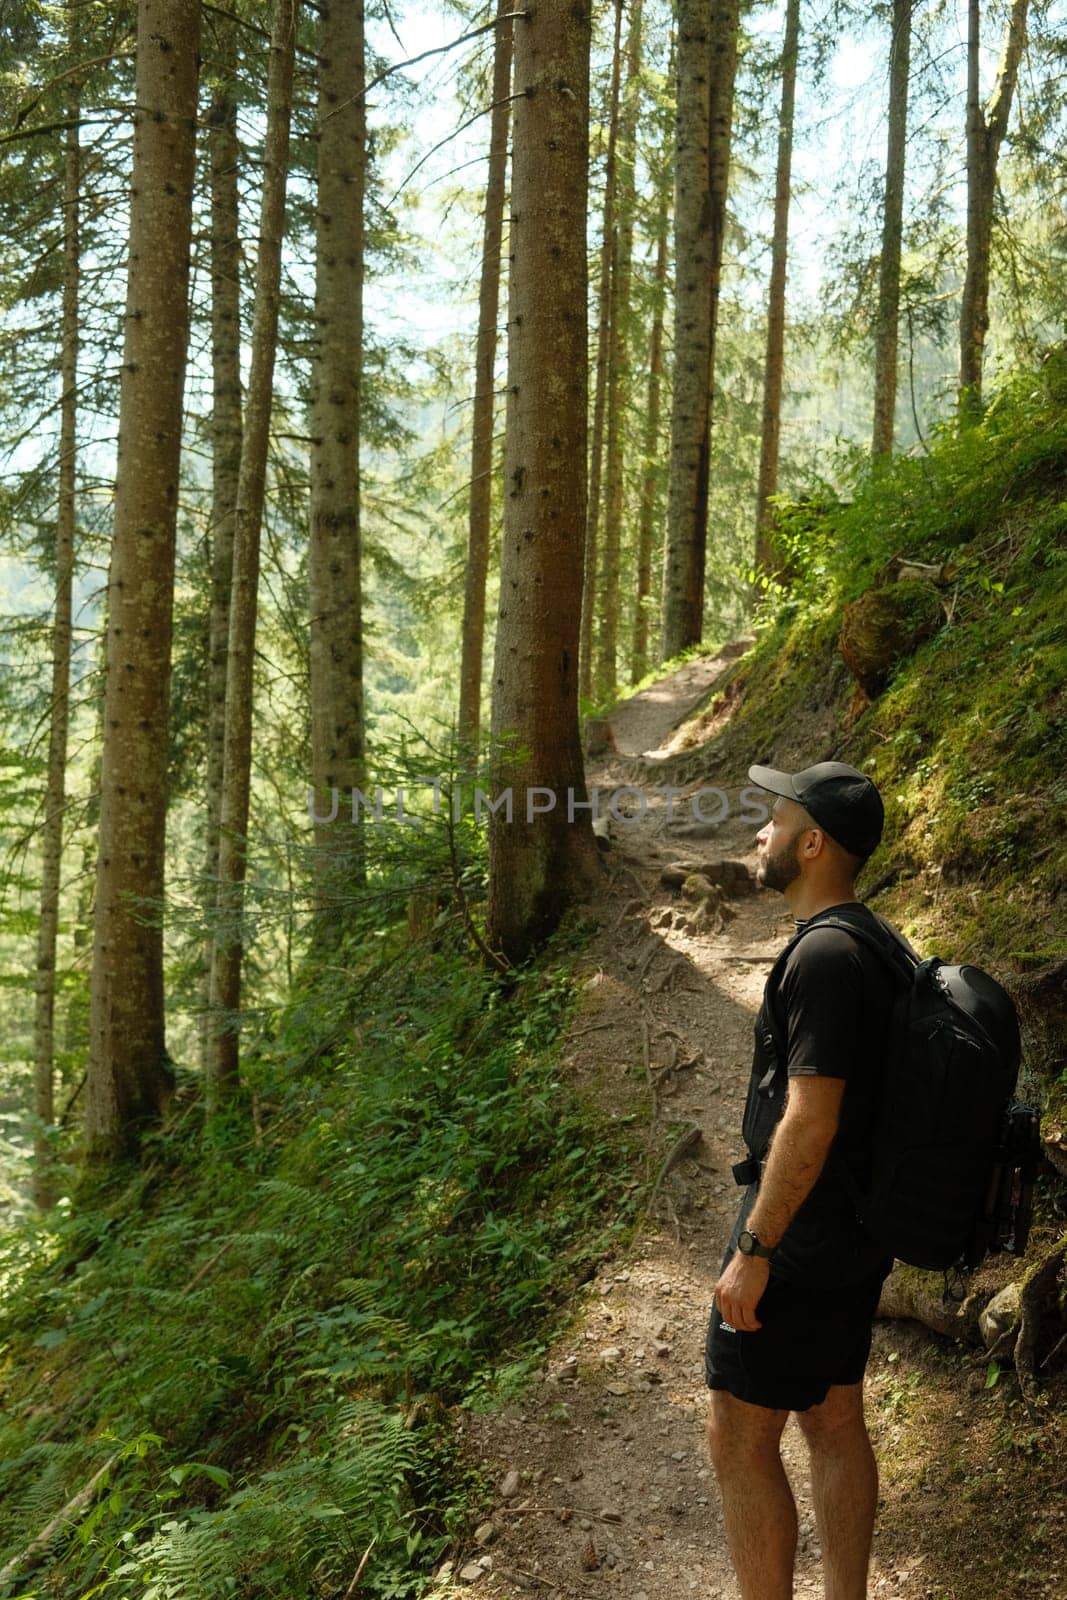 Hiker with cap and black outfit on forest path between trees by rherrmannde